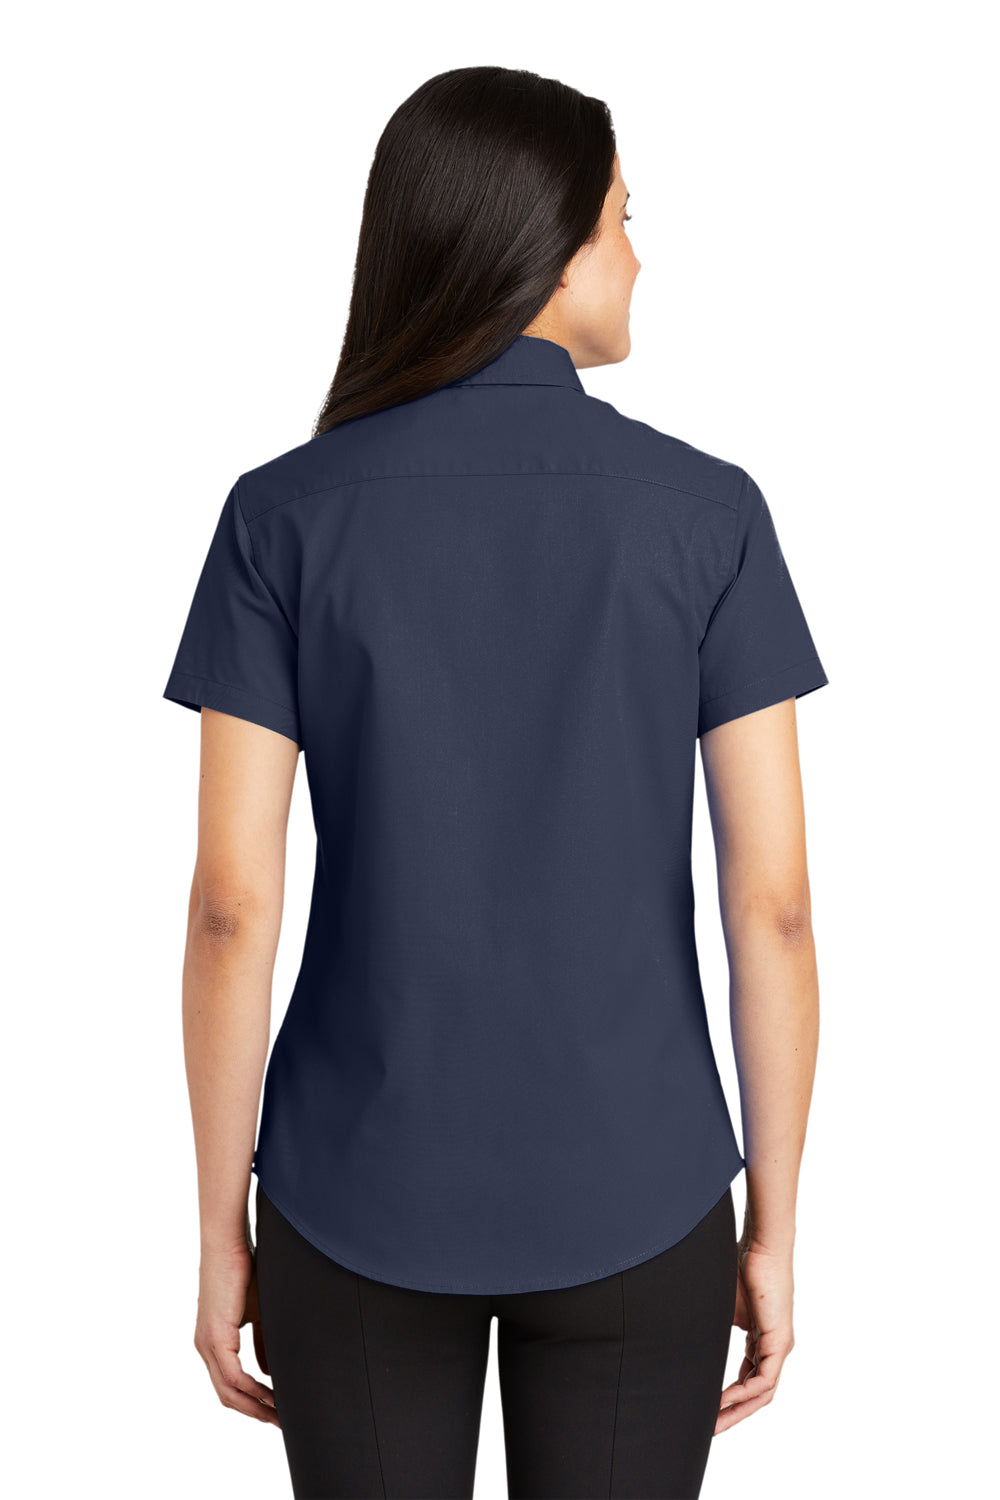 Port Authority L508 Womens Easy Care Wrinkle Resistant Short Sleeve Button Down Shirt Navy Blue Back